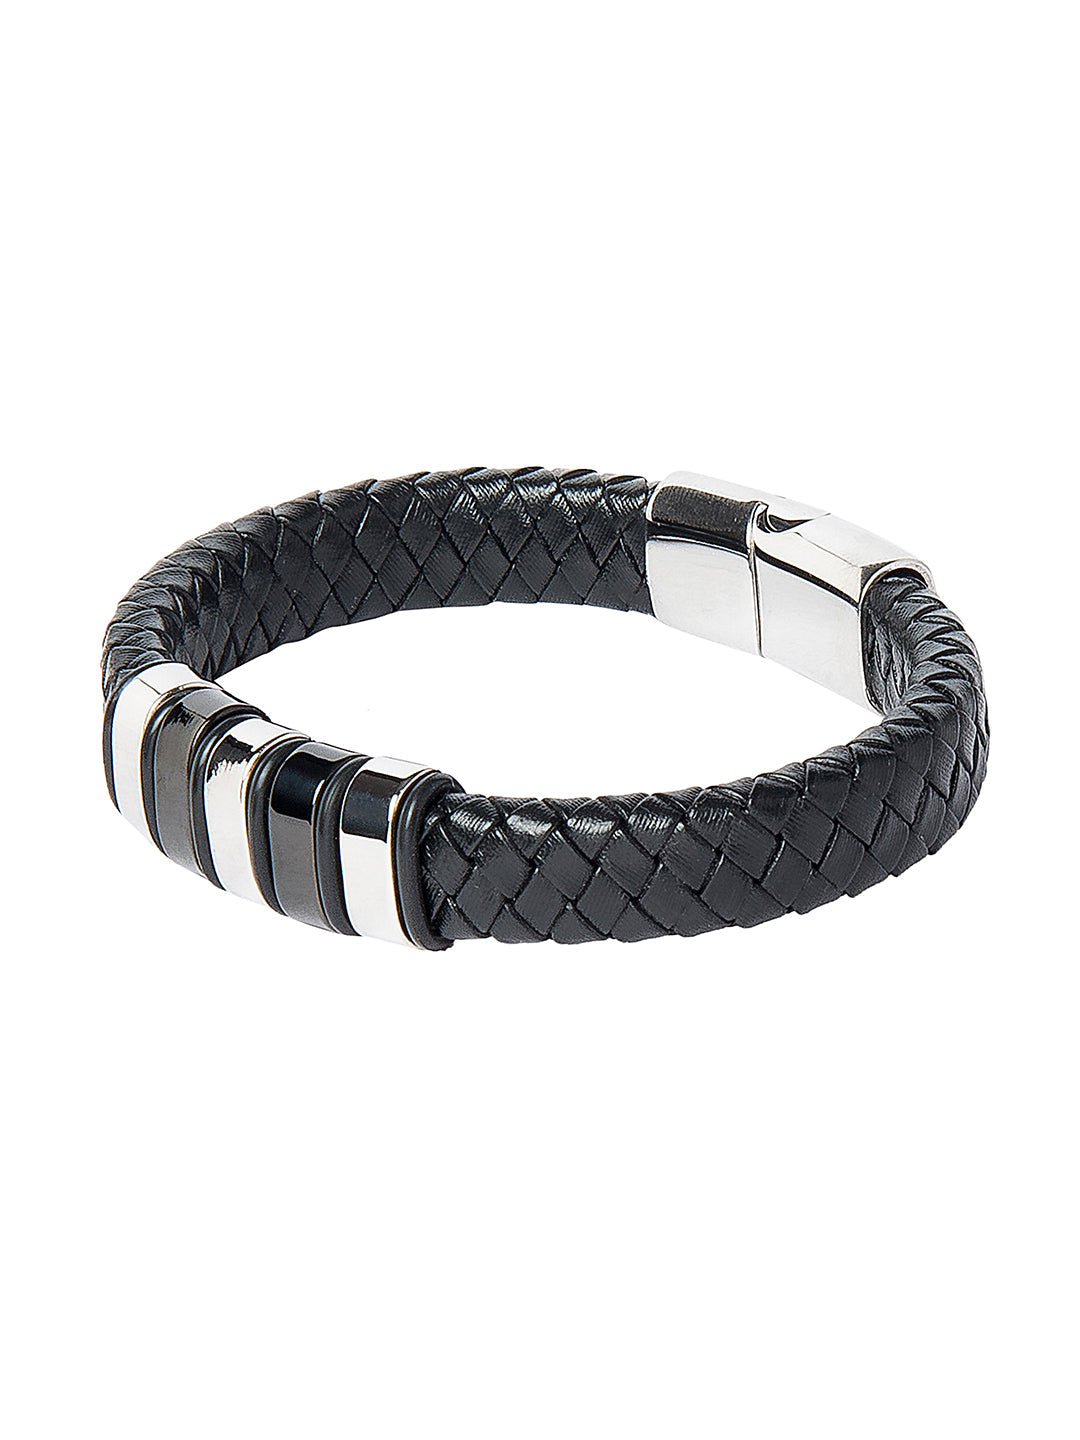 John Hardy Mens Triple Wrap Black Leather and Multi-Bead Bracelet with  Silver Hook Clasp | Mens sterling silver jewelry, Mens designer jewelry, Mens  jewelry